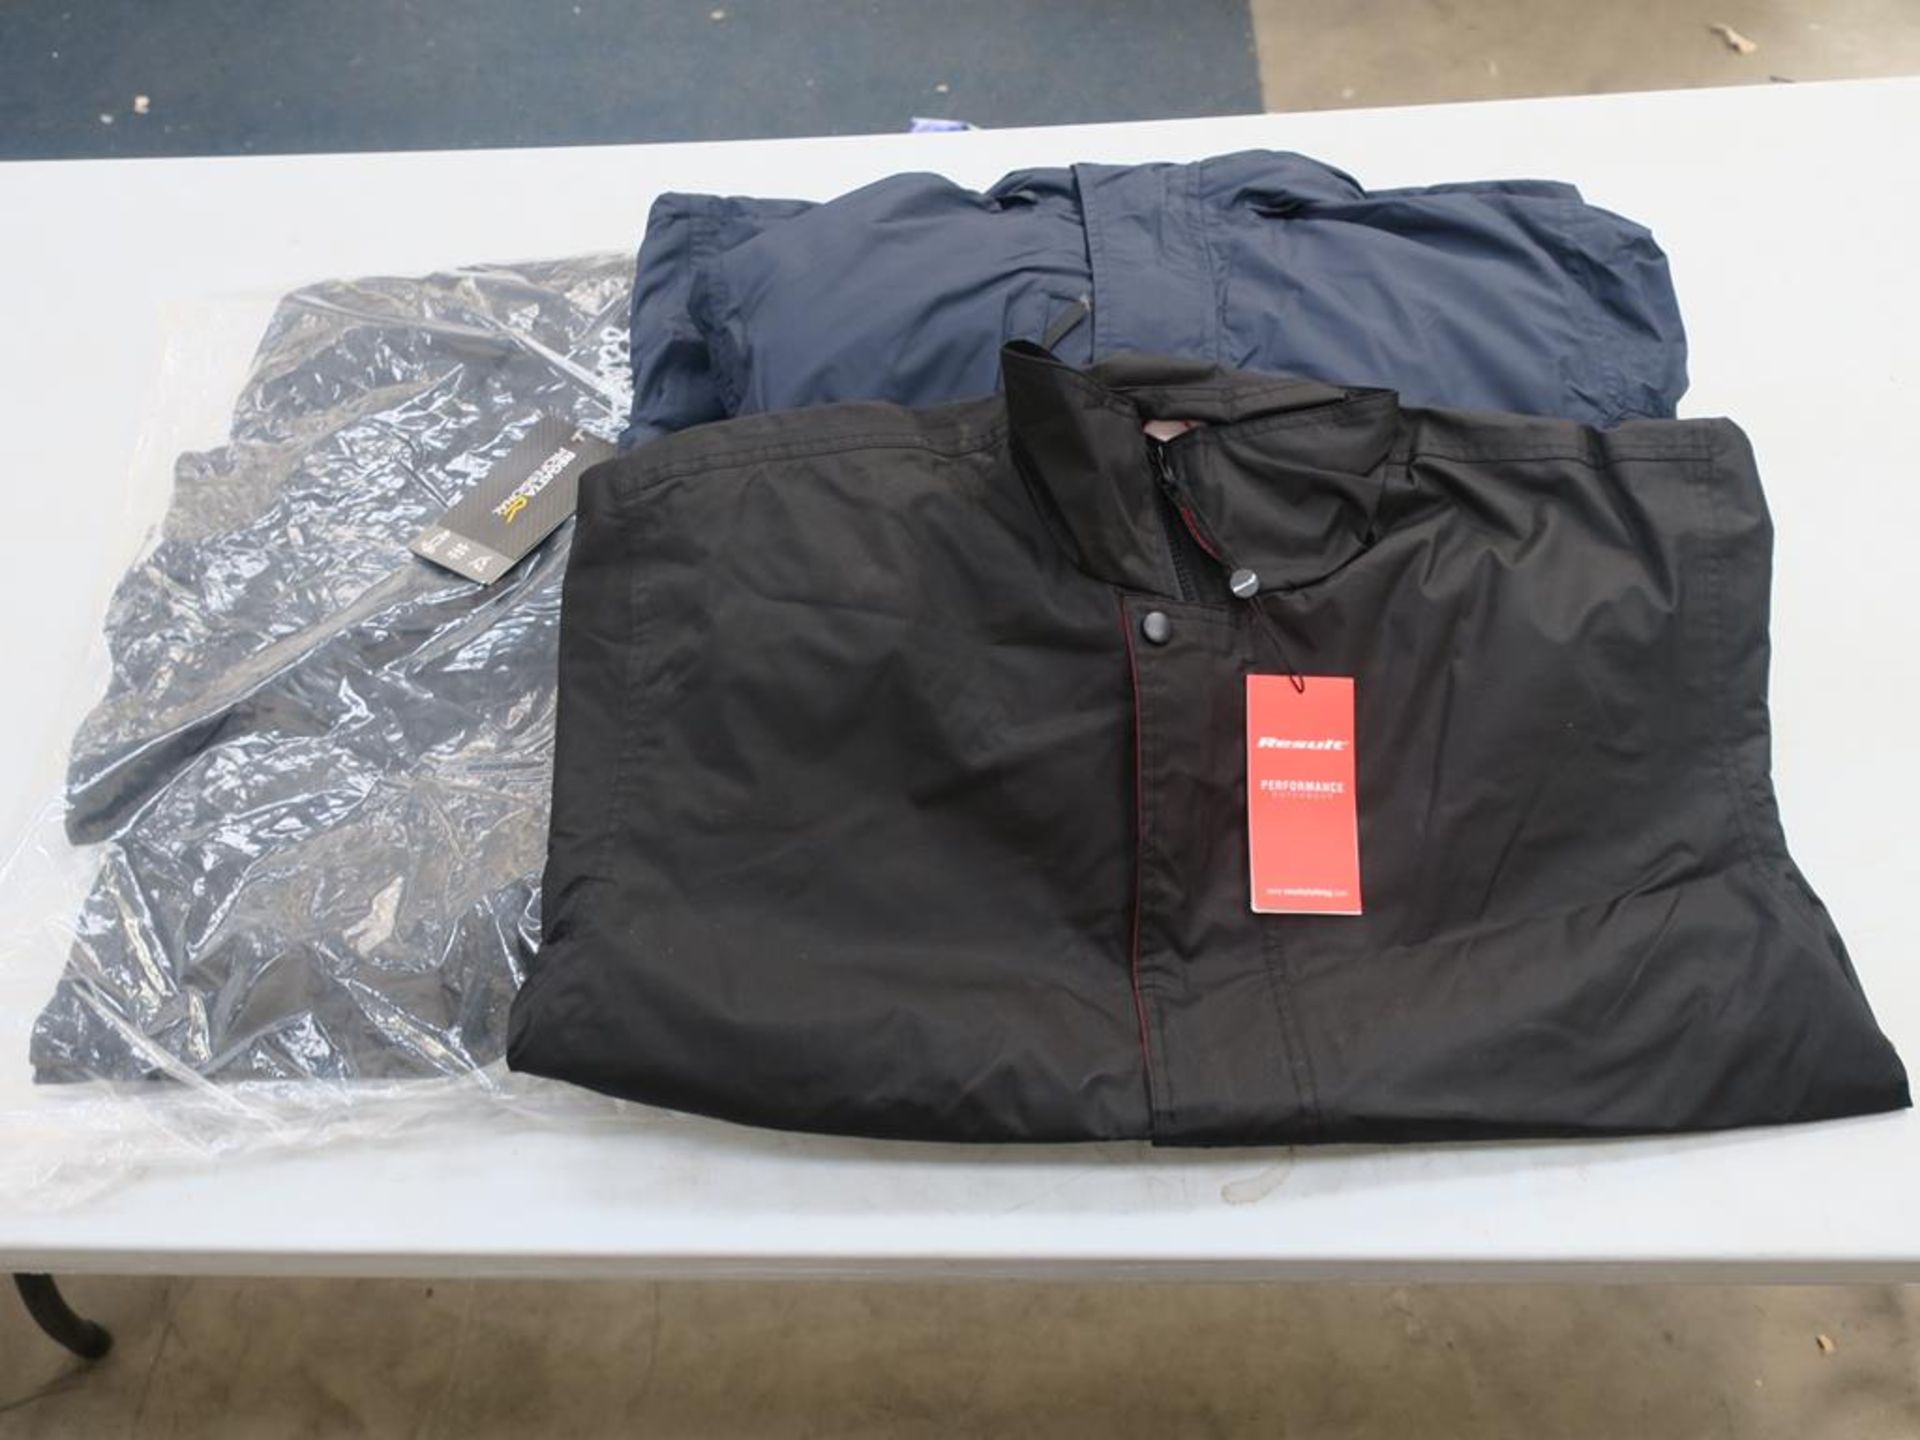 * A box of Waterproof Jackets in Navy and Black (sizes include S,M,and L (5)